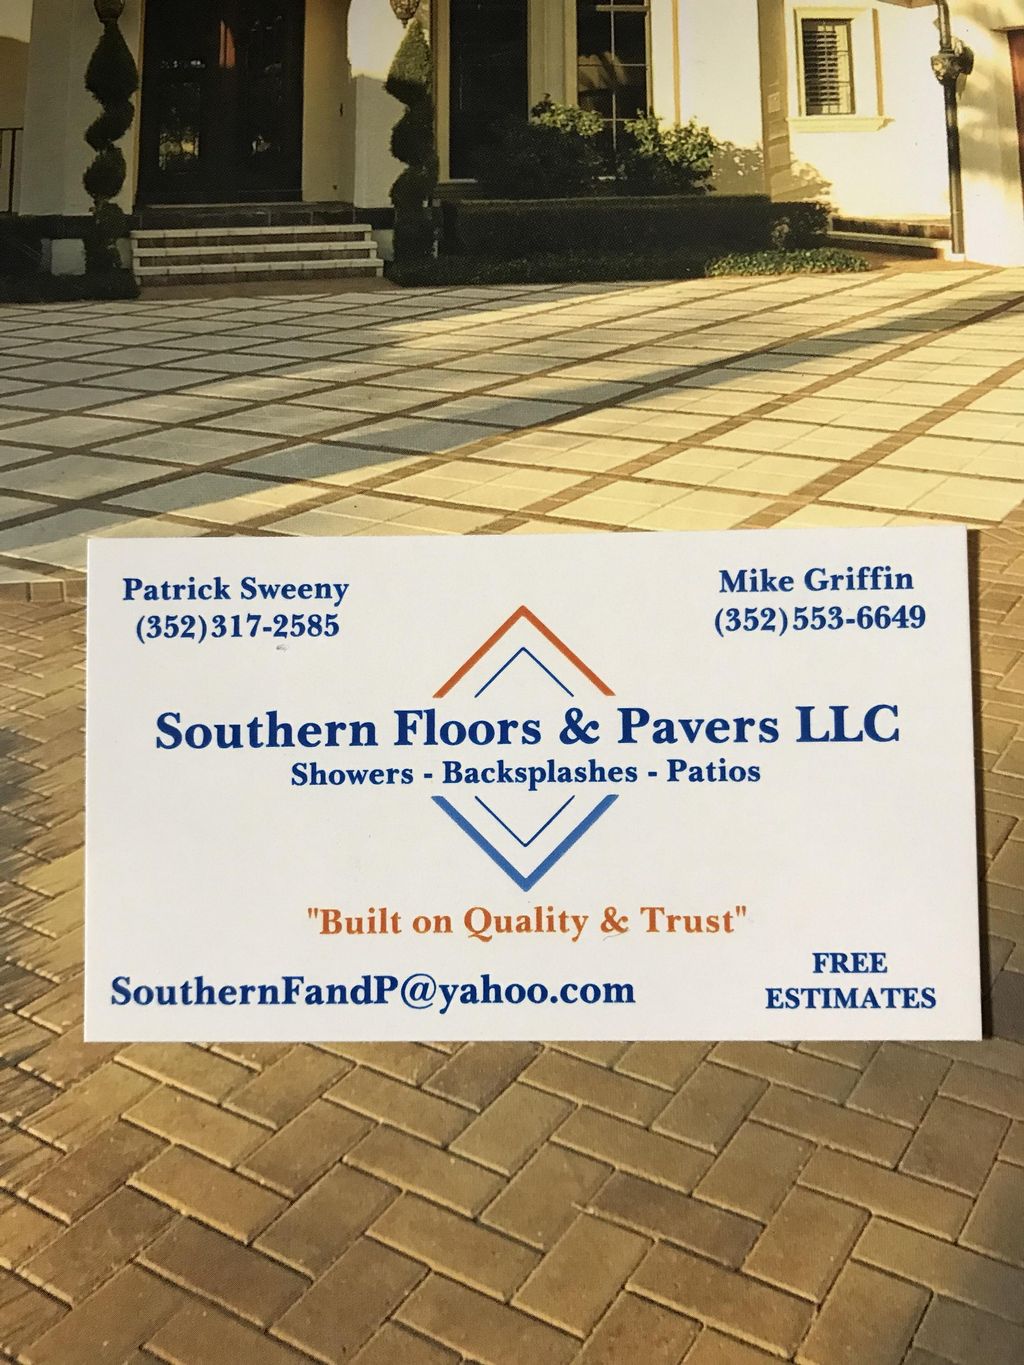 Southern Floors and Pavers LLC